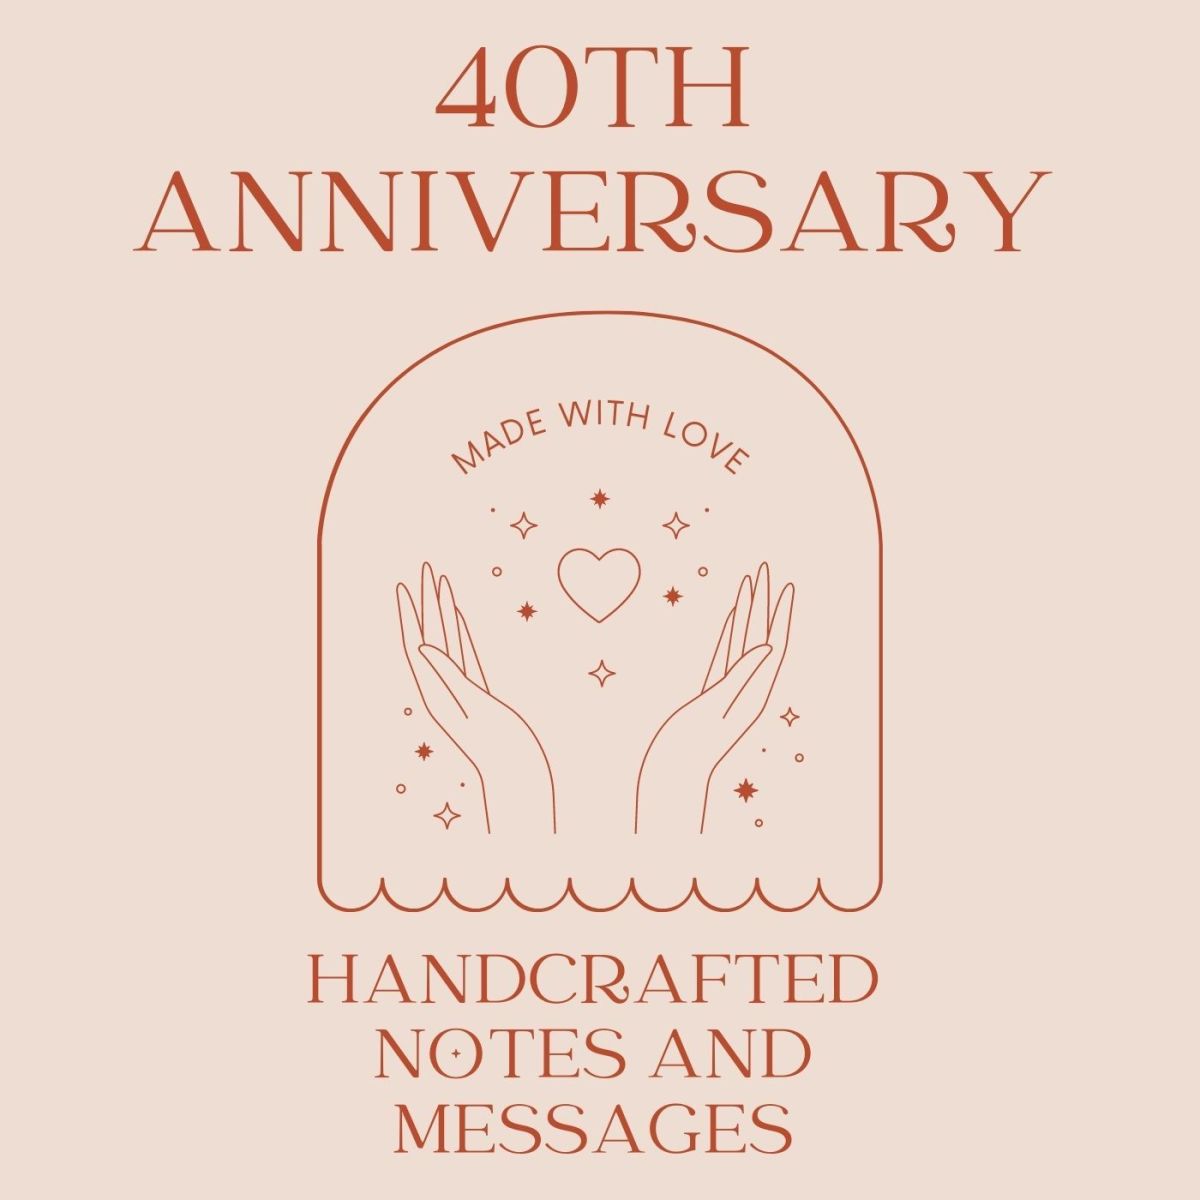 40th Anniversary: Wishes, Quotes, and Poems for Cards